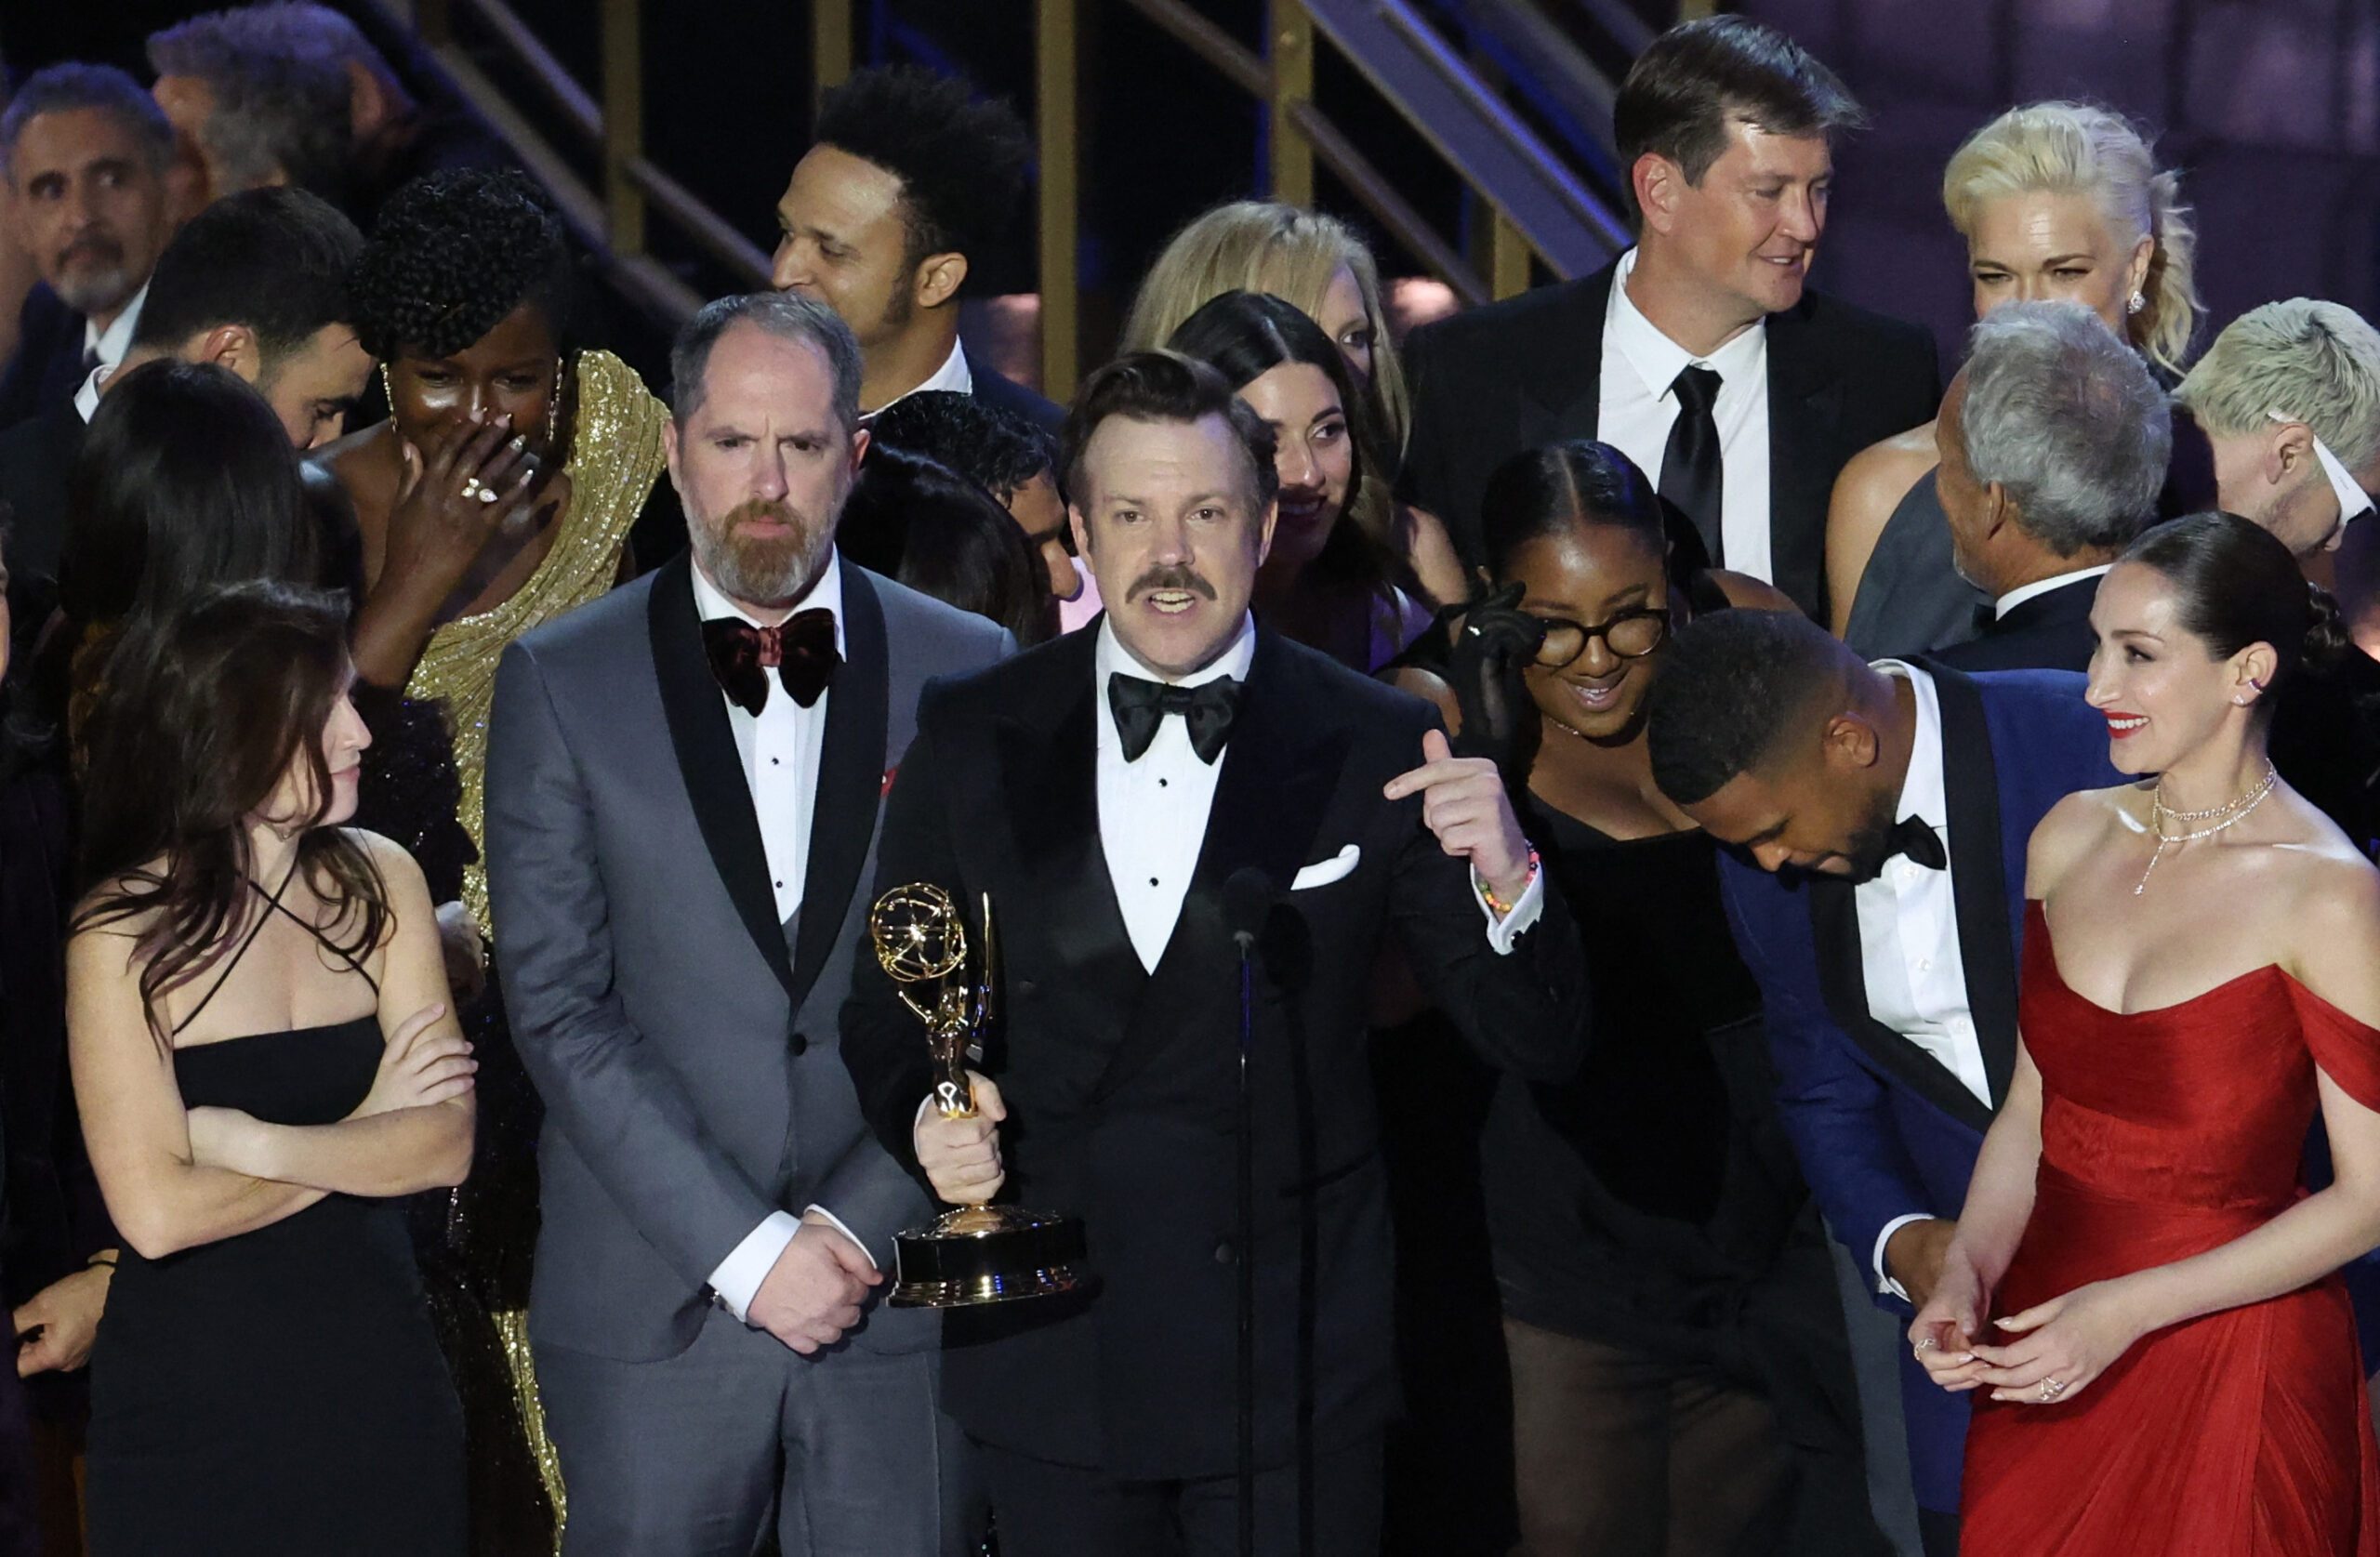 ‘Succession,’ ‘Ted Lasso’ win top awards at the Emmys